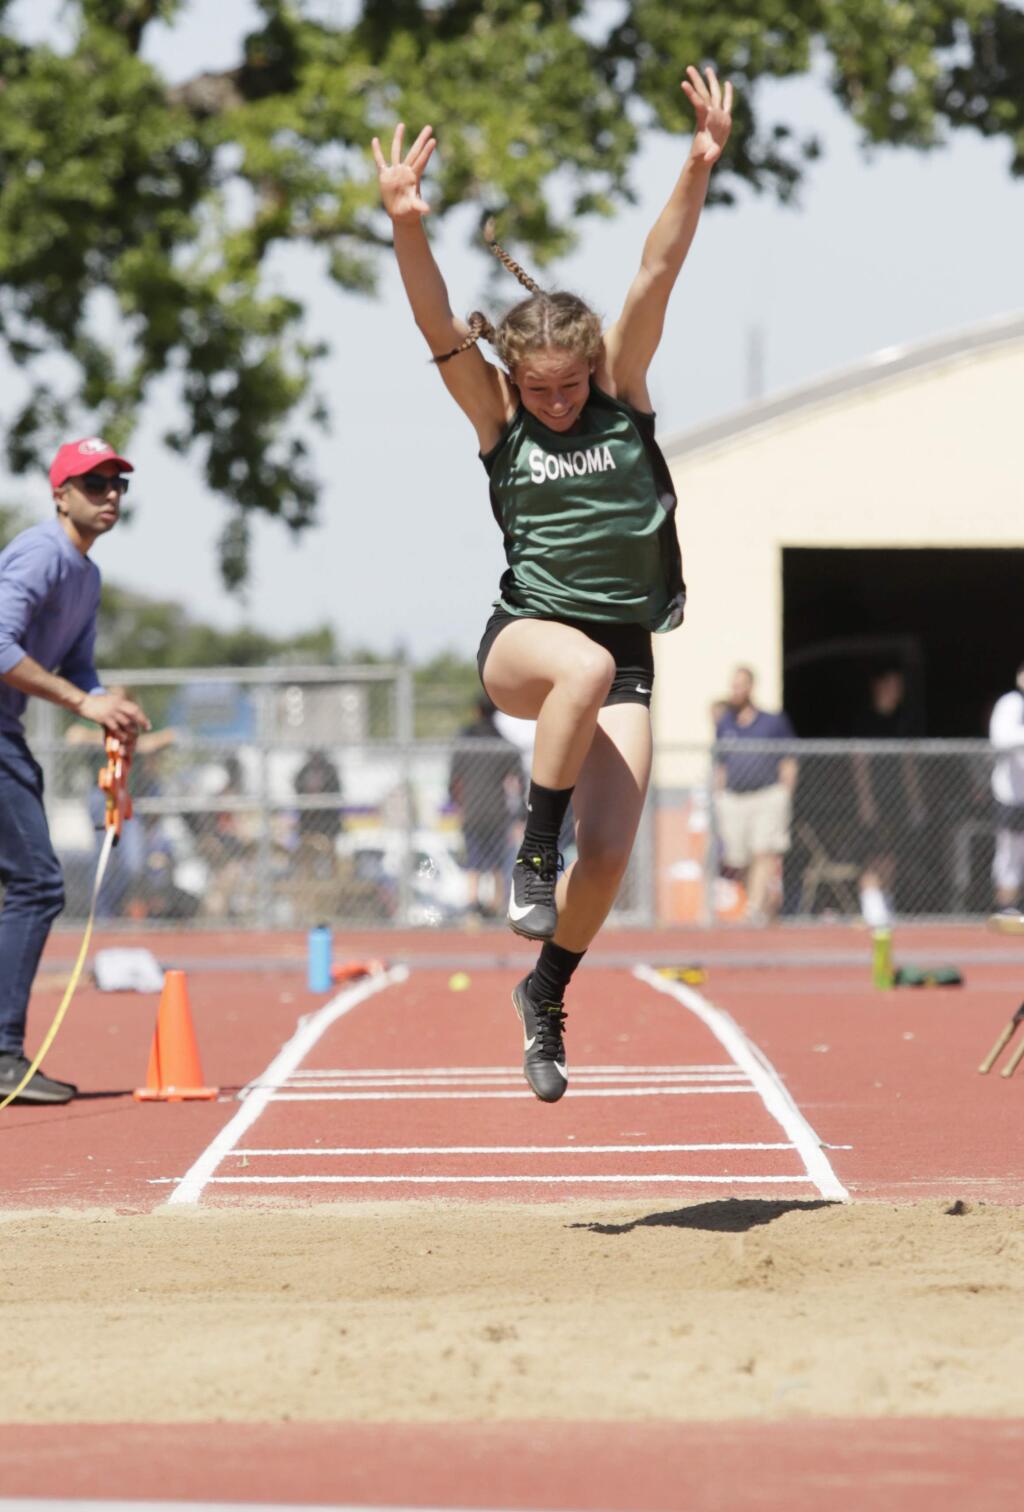 Bill Hoban/Index-TribuneSonoma's Kaylie Barrera gets ready to stick a landing in the triple jump at Saturday's NCS Meet. Barerra and Emma Maggioncalda qualified for the Meet of Champions this weekend in Berkeley.